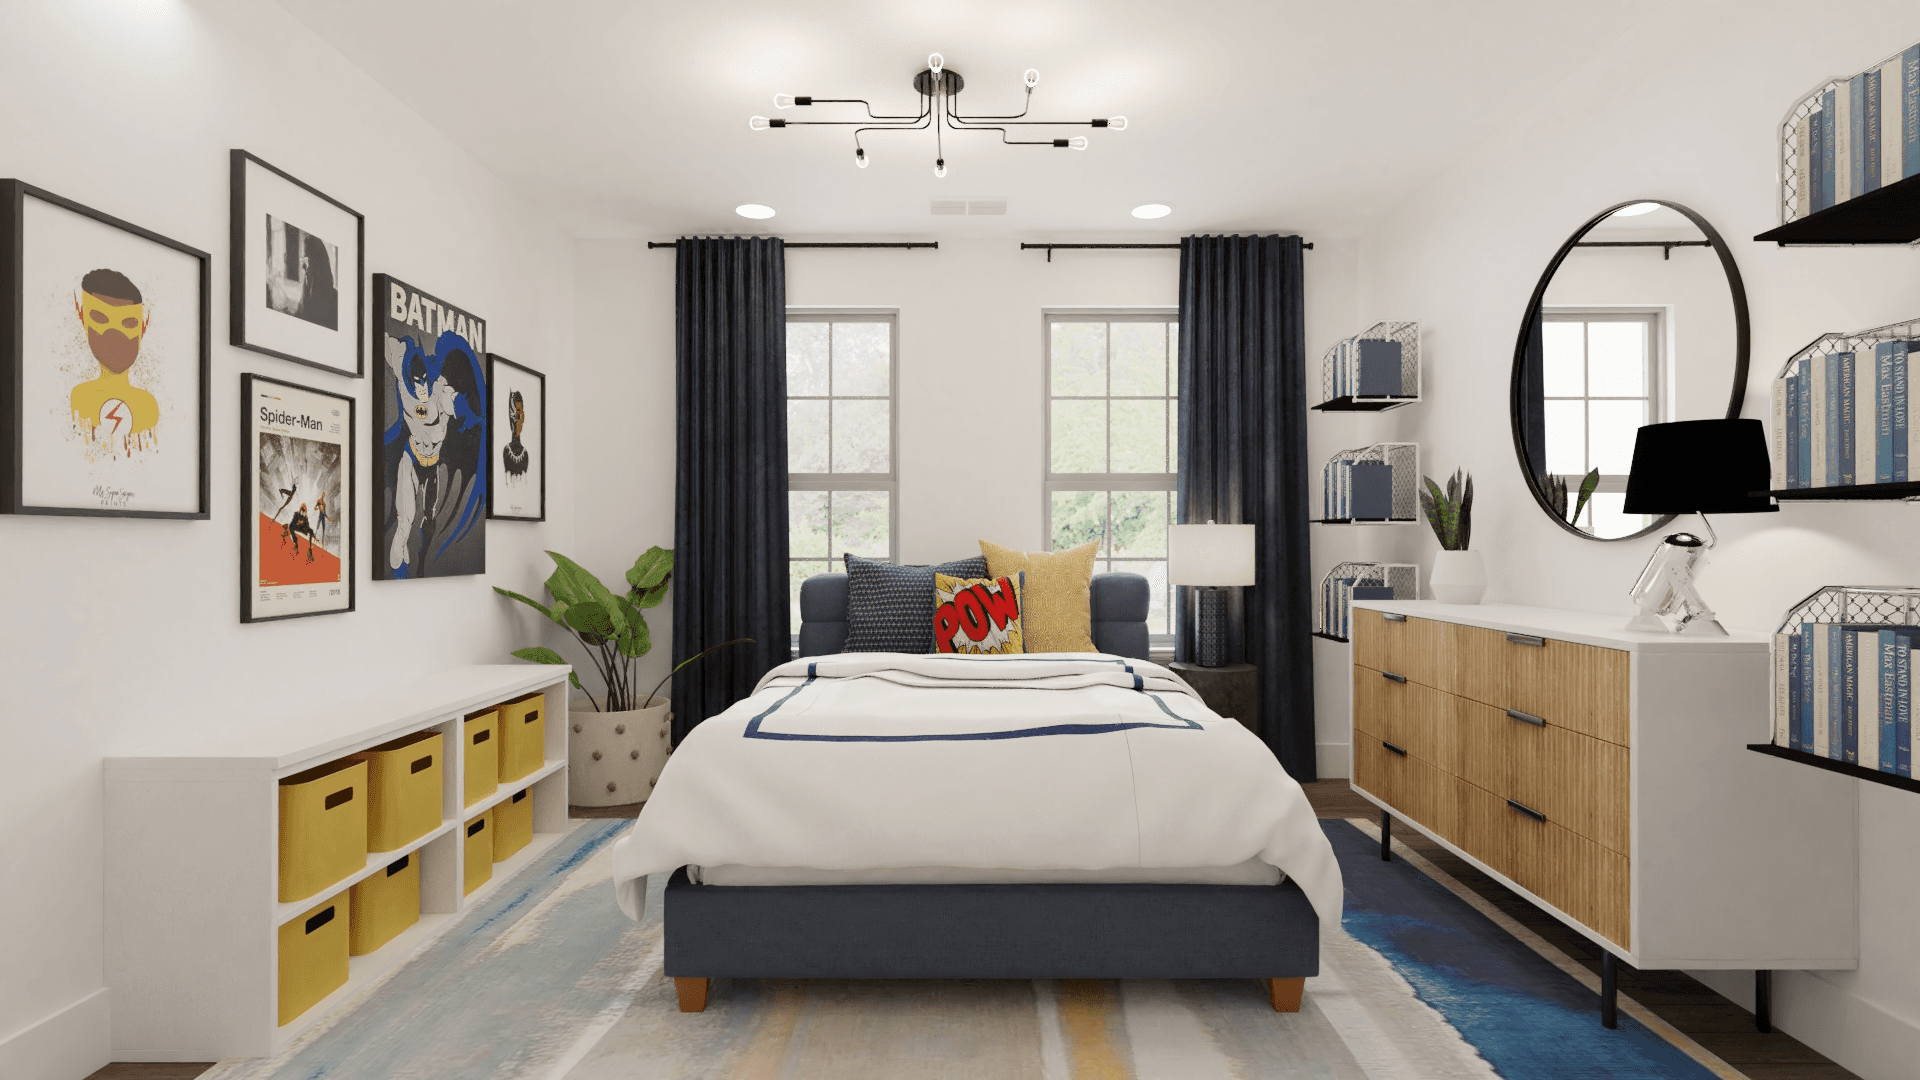 Superhero Themed Kids Bedroom with Pops of Color